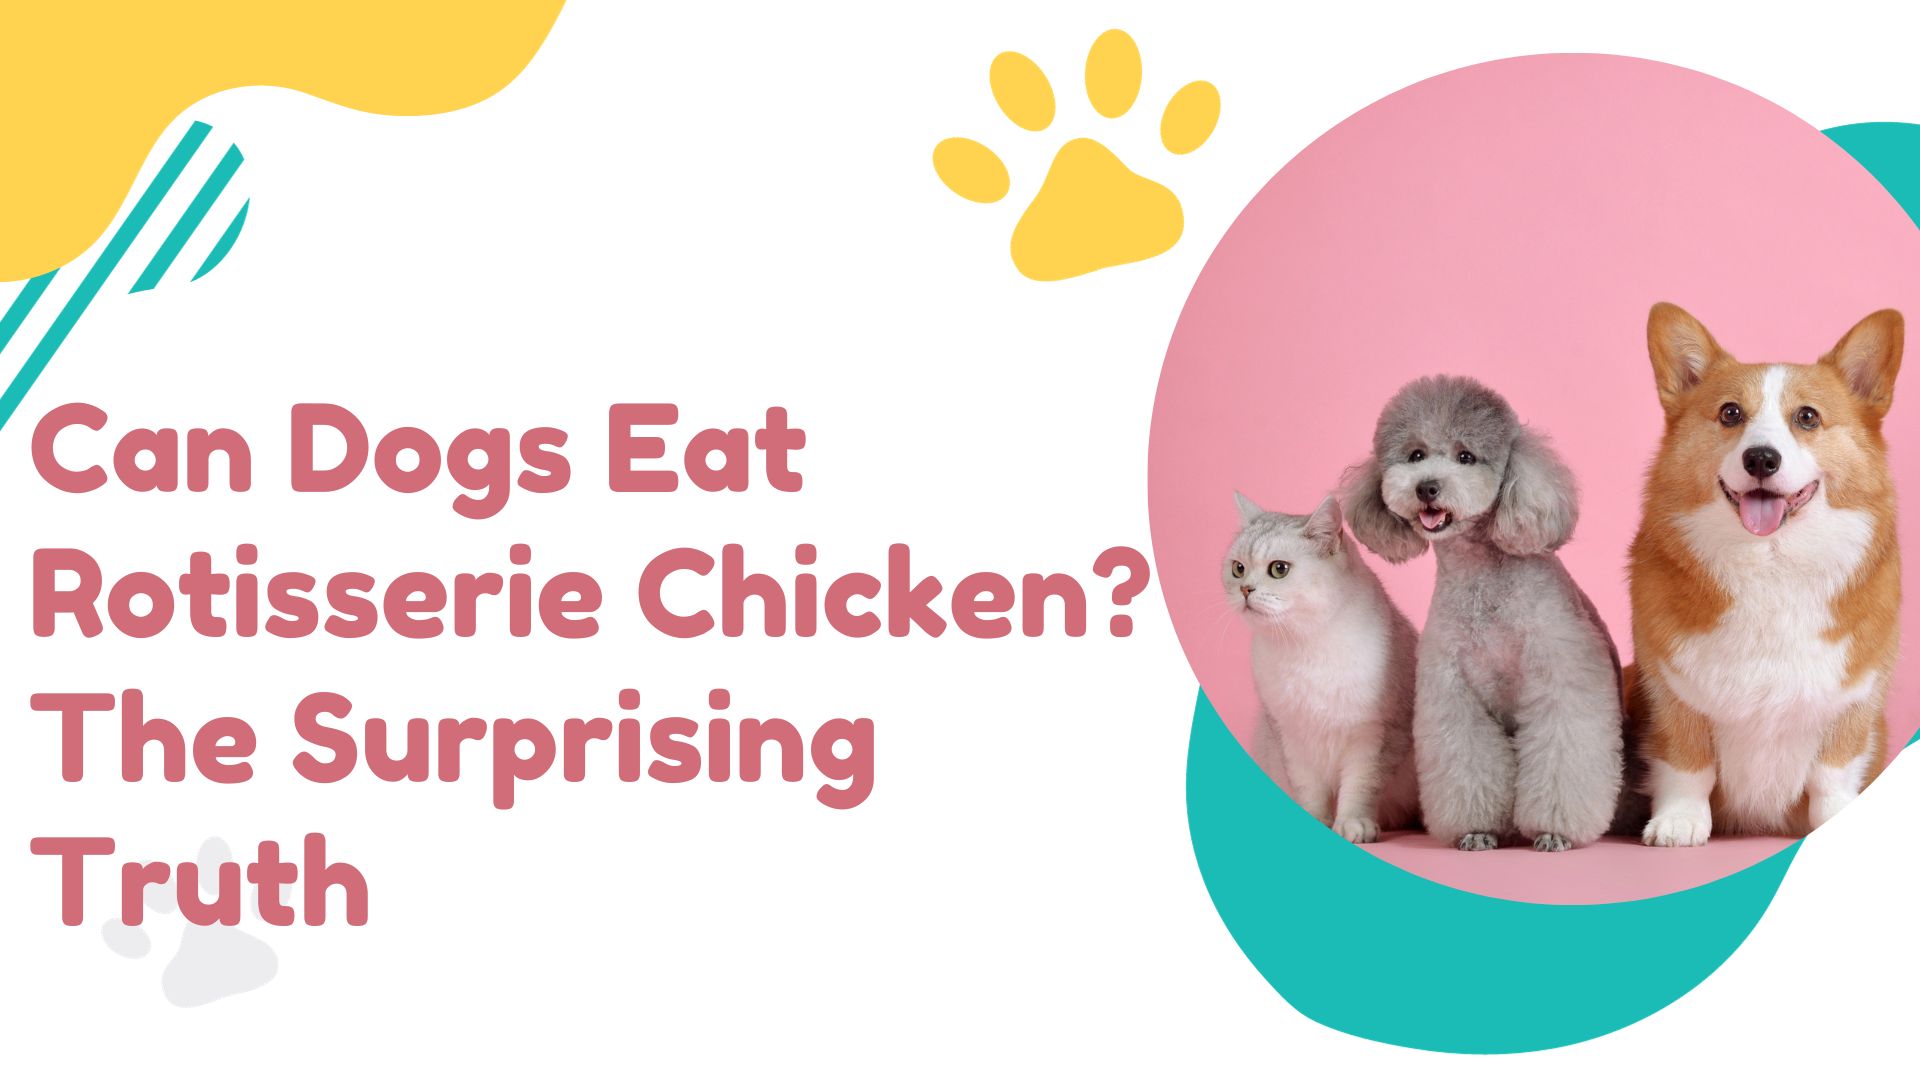 Can Dogs Eat Rotisserie Chicken?